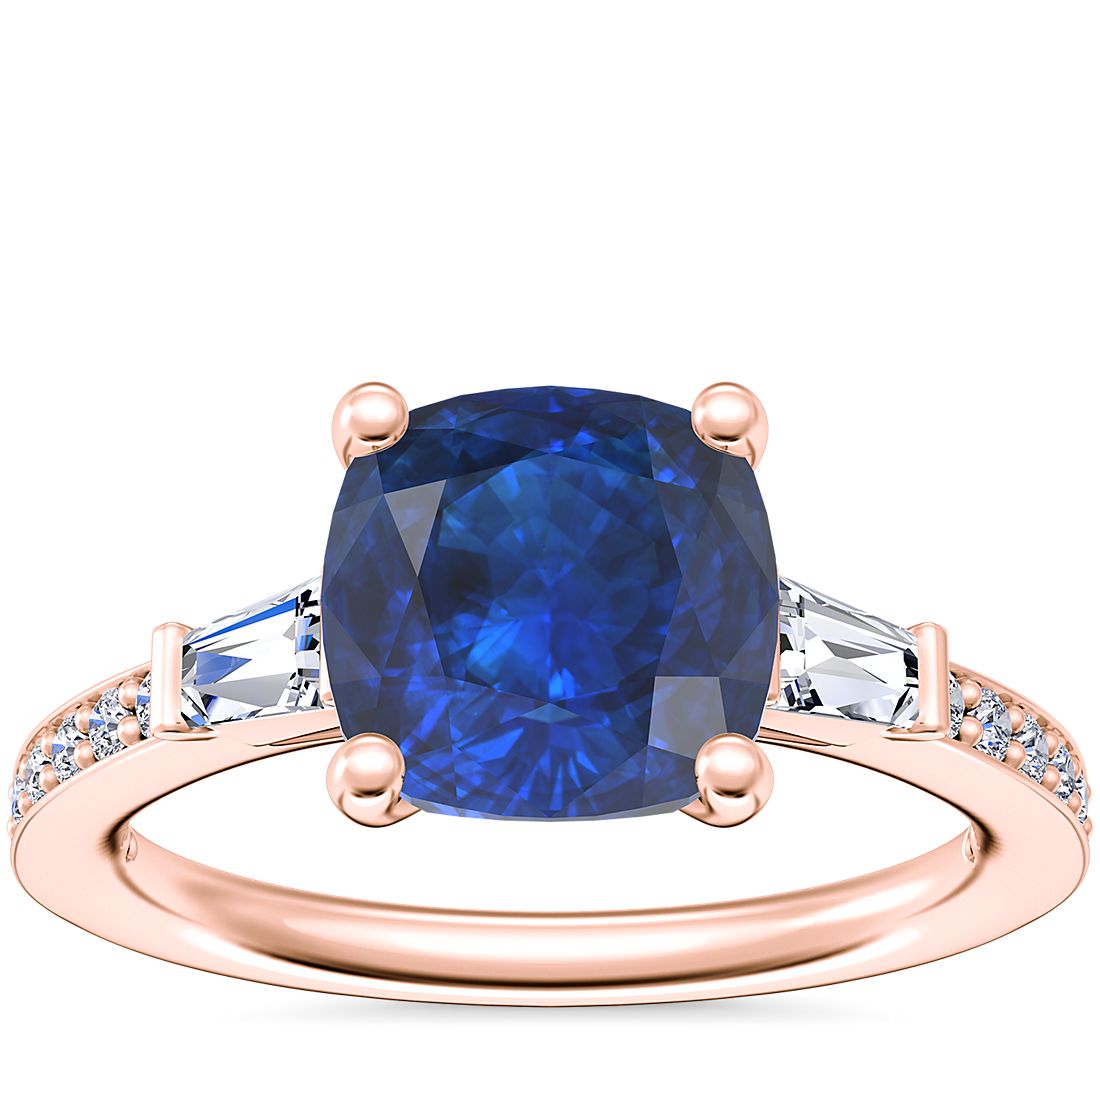 Tapered Baguette Diamond Cathedral Engagement Ring with Cushion Sapphire in 14k Rose Gold (8mm)